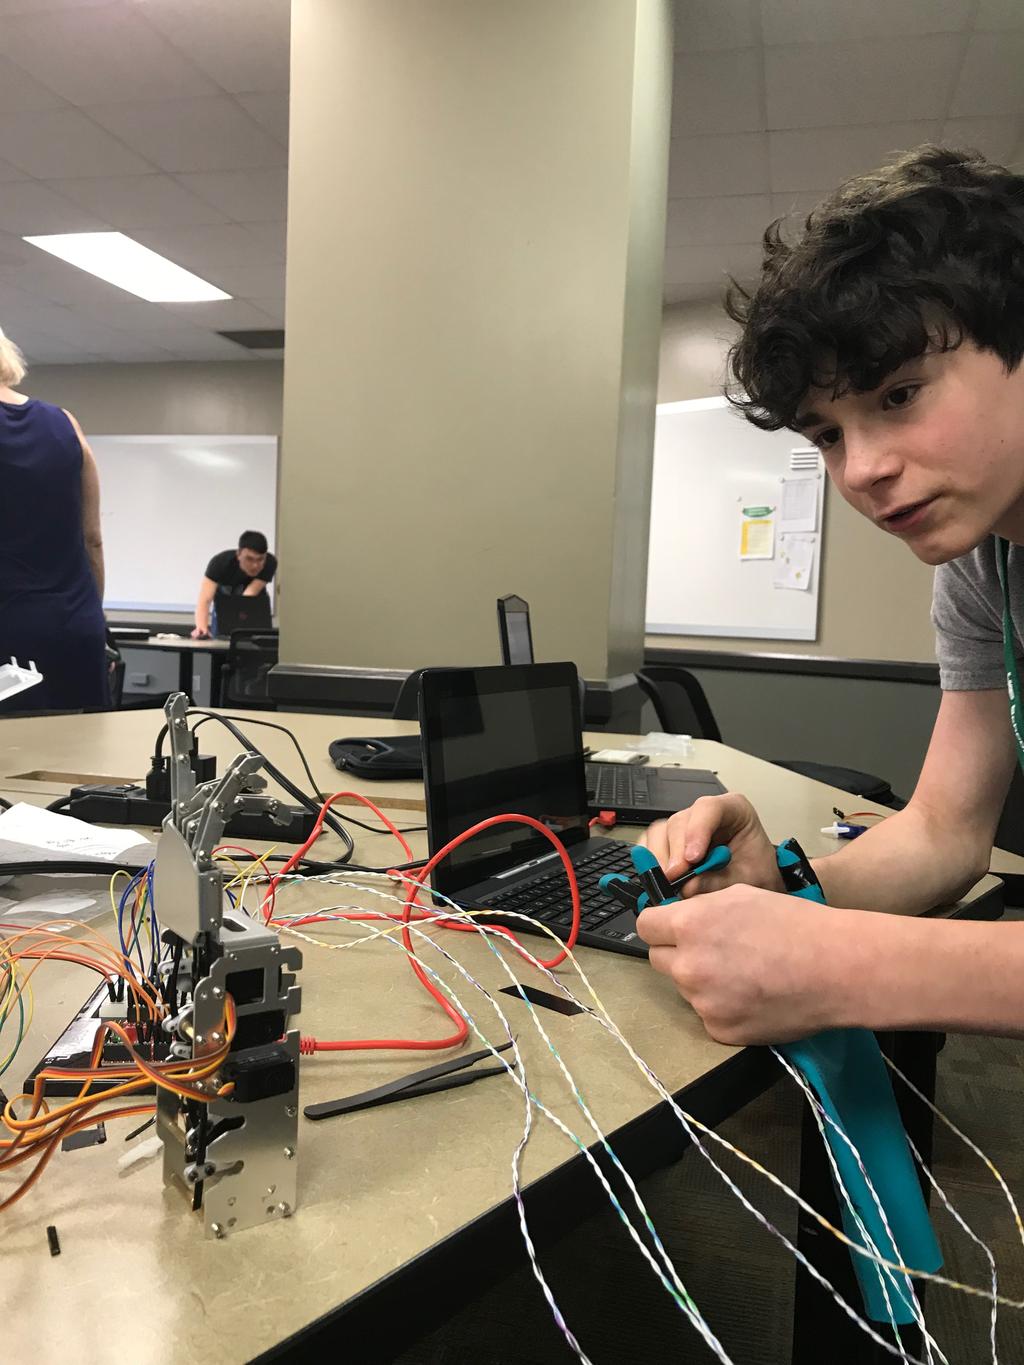 This camp covers the basics of embedded computers that are present almost all smart devices and portable medical devices.